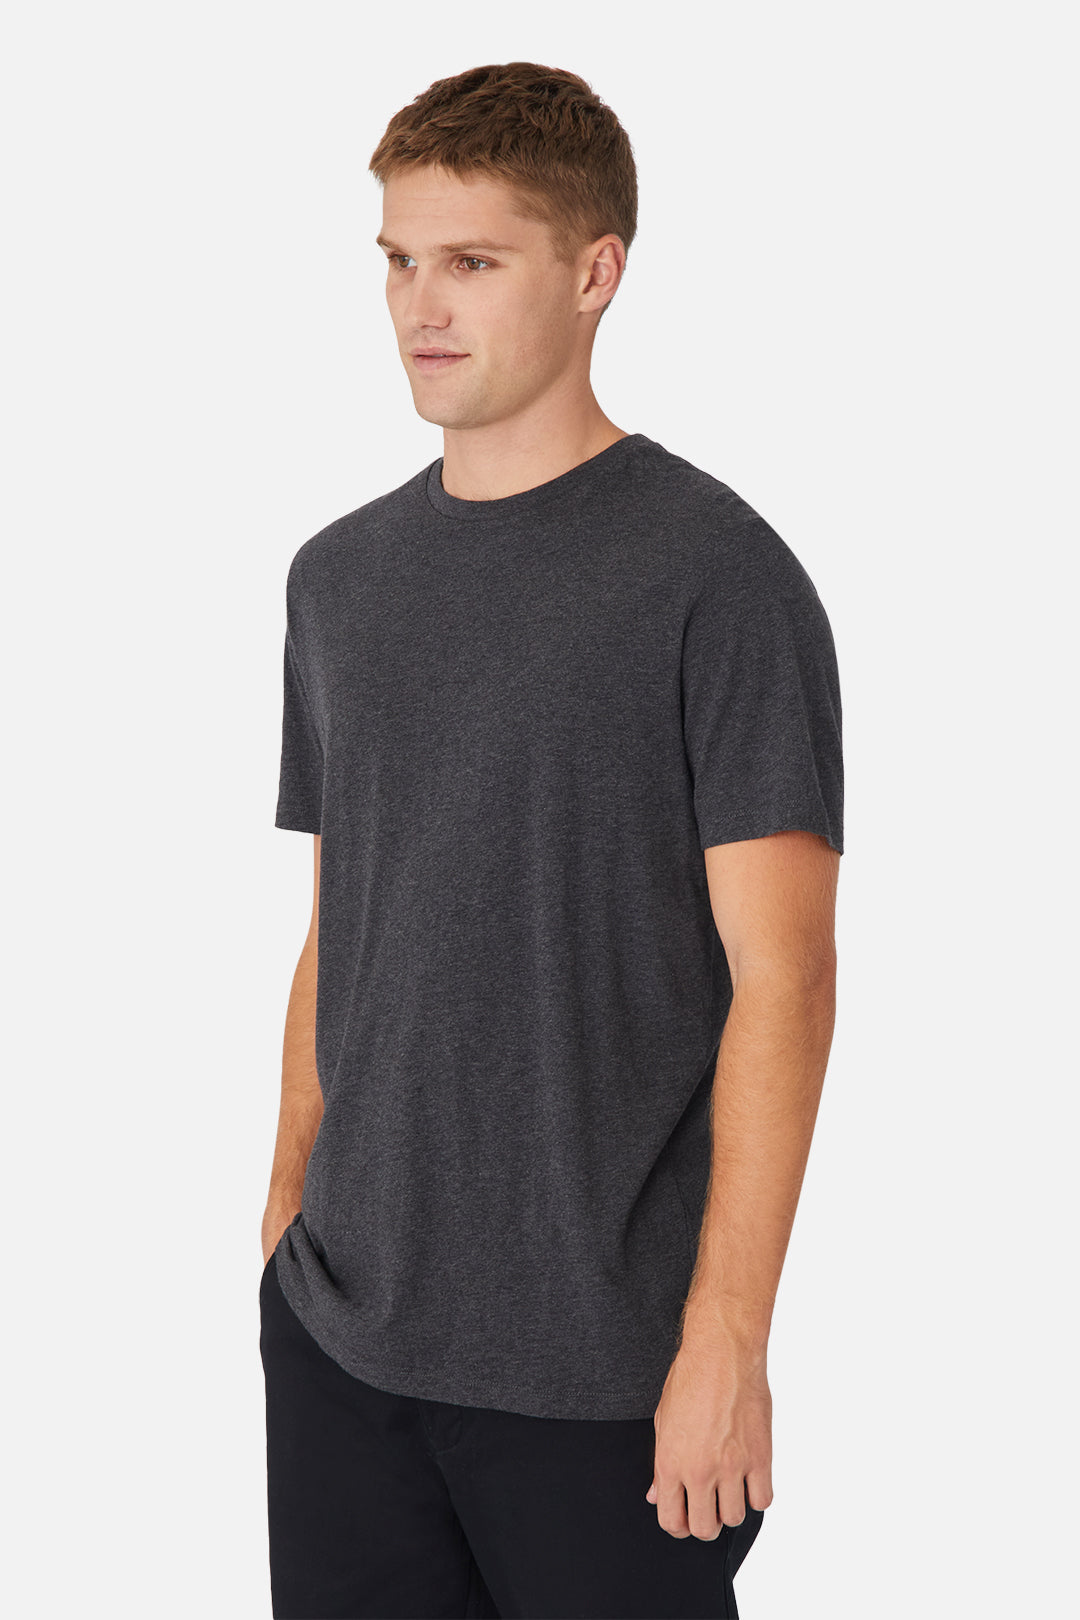 Stealth Crew Neck T-Shirt Charcoal Marl